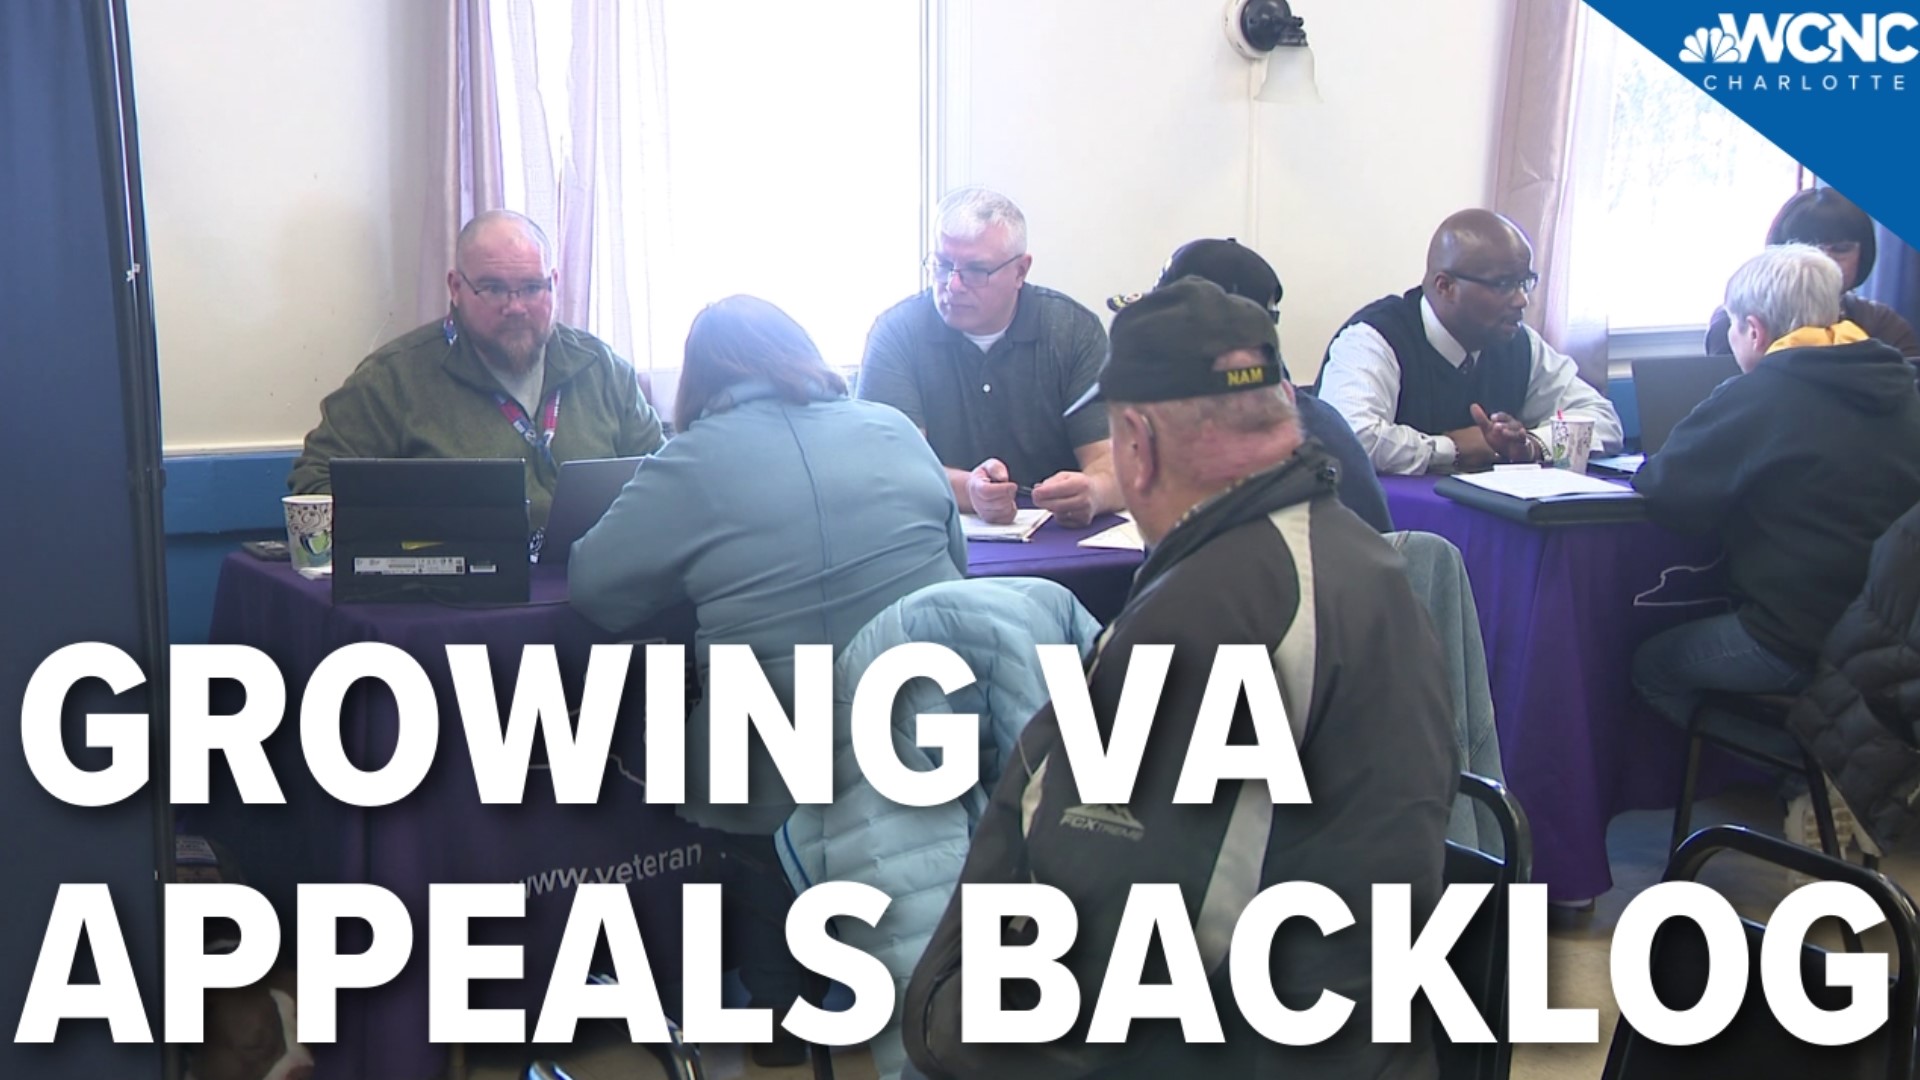 WCNC Charlotte recently documented a growing backlog of undecided appeals that often leave veterans waiting years for decisions about their benefits.